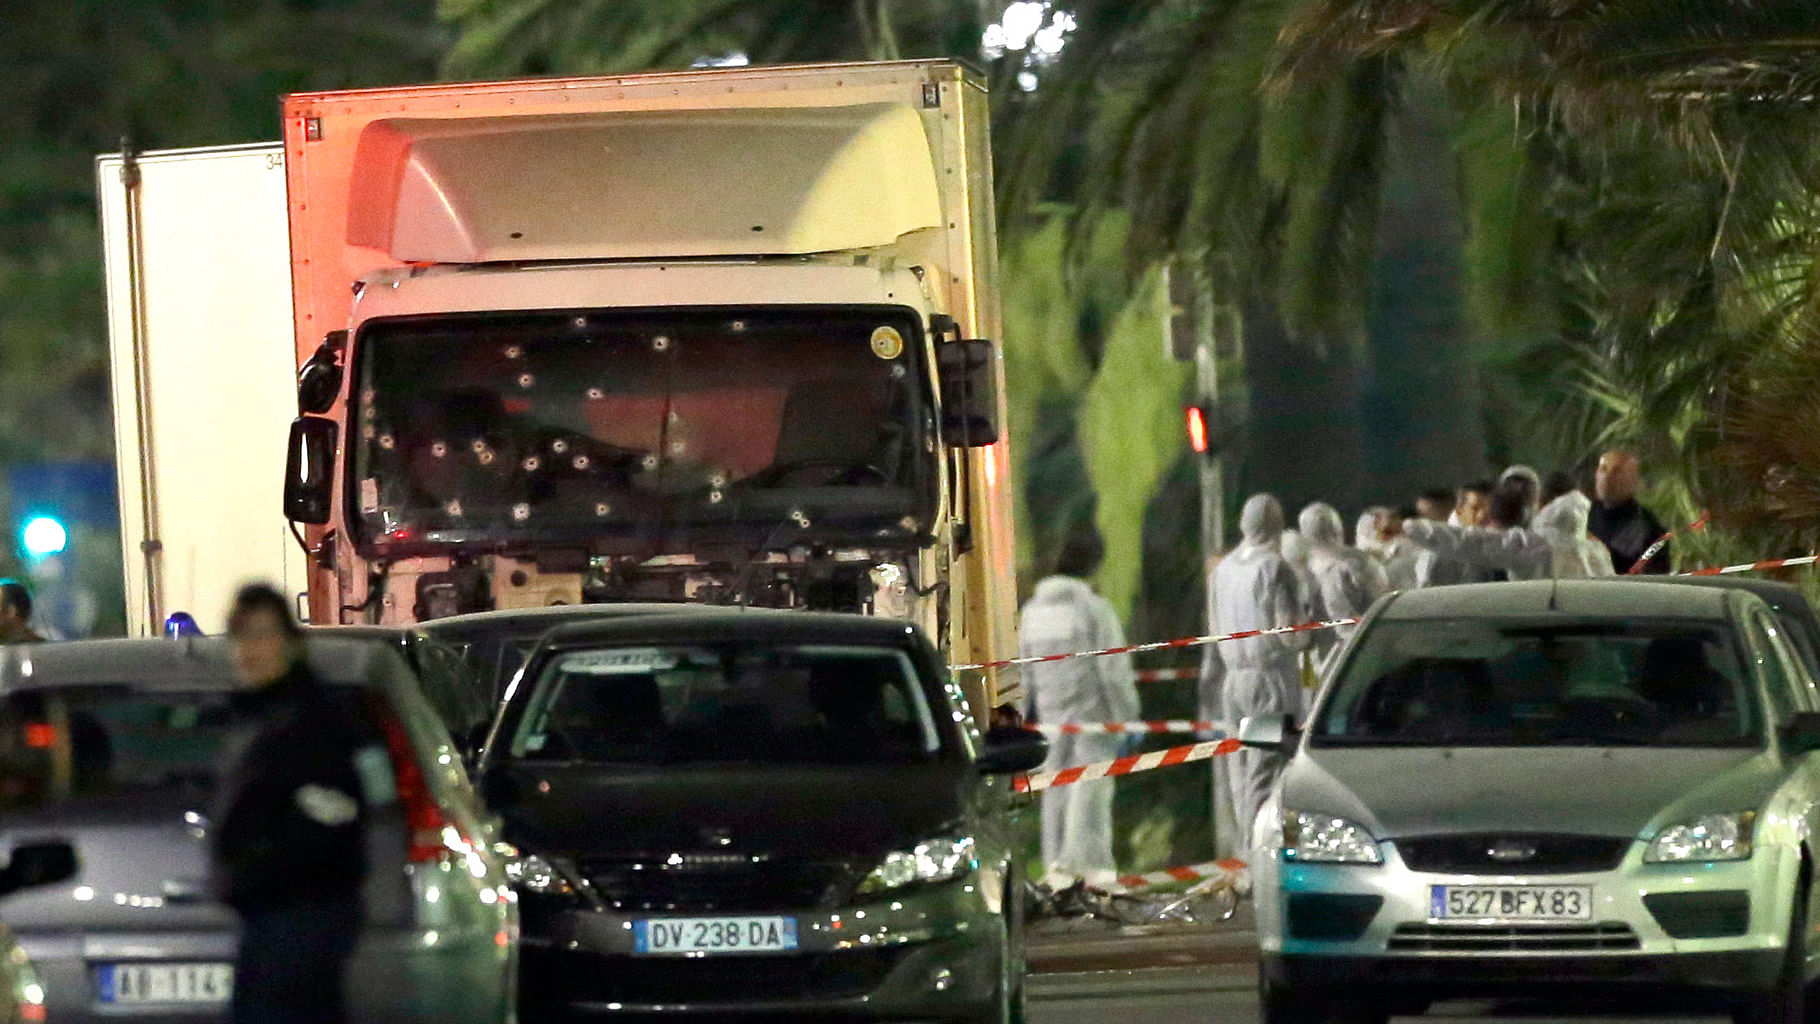 

Forensic officers stand near the truck that plowed through a crowd of revellers in Nice, Paris. (Photo: AP) 